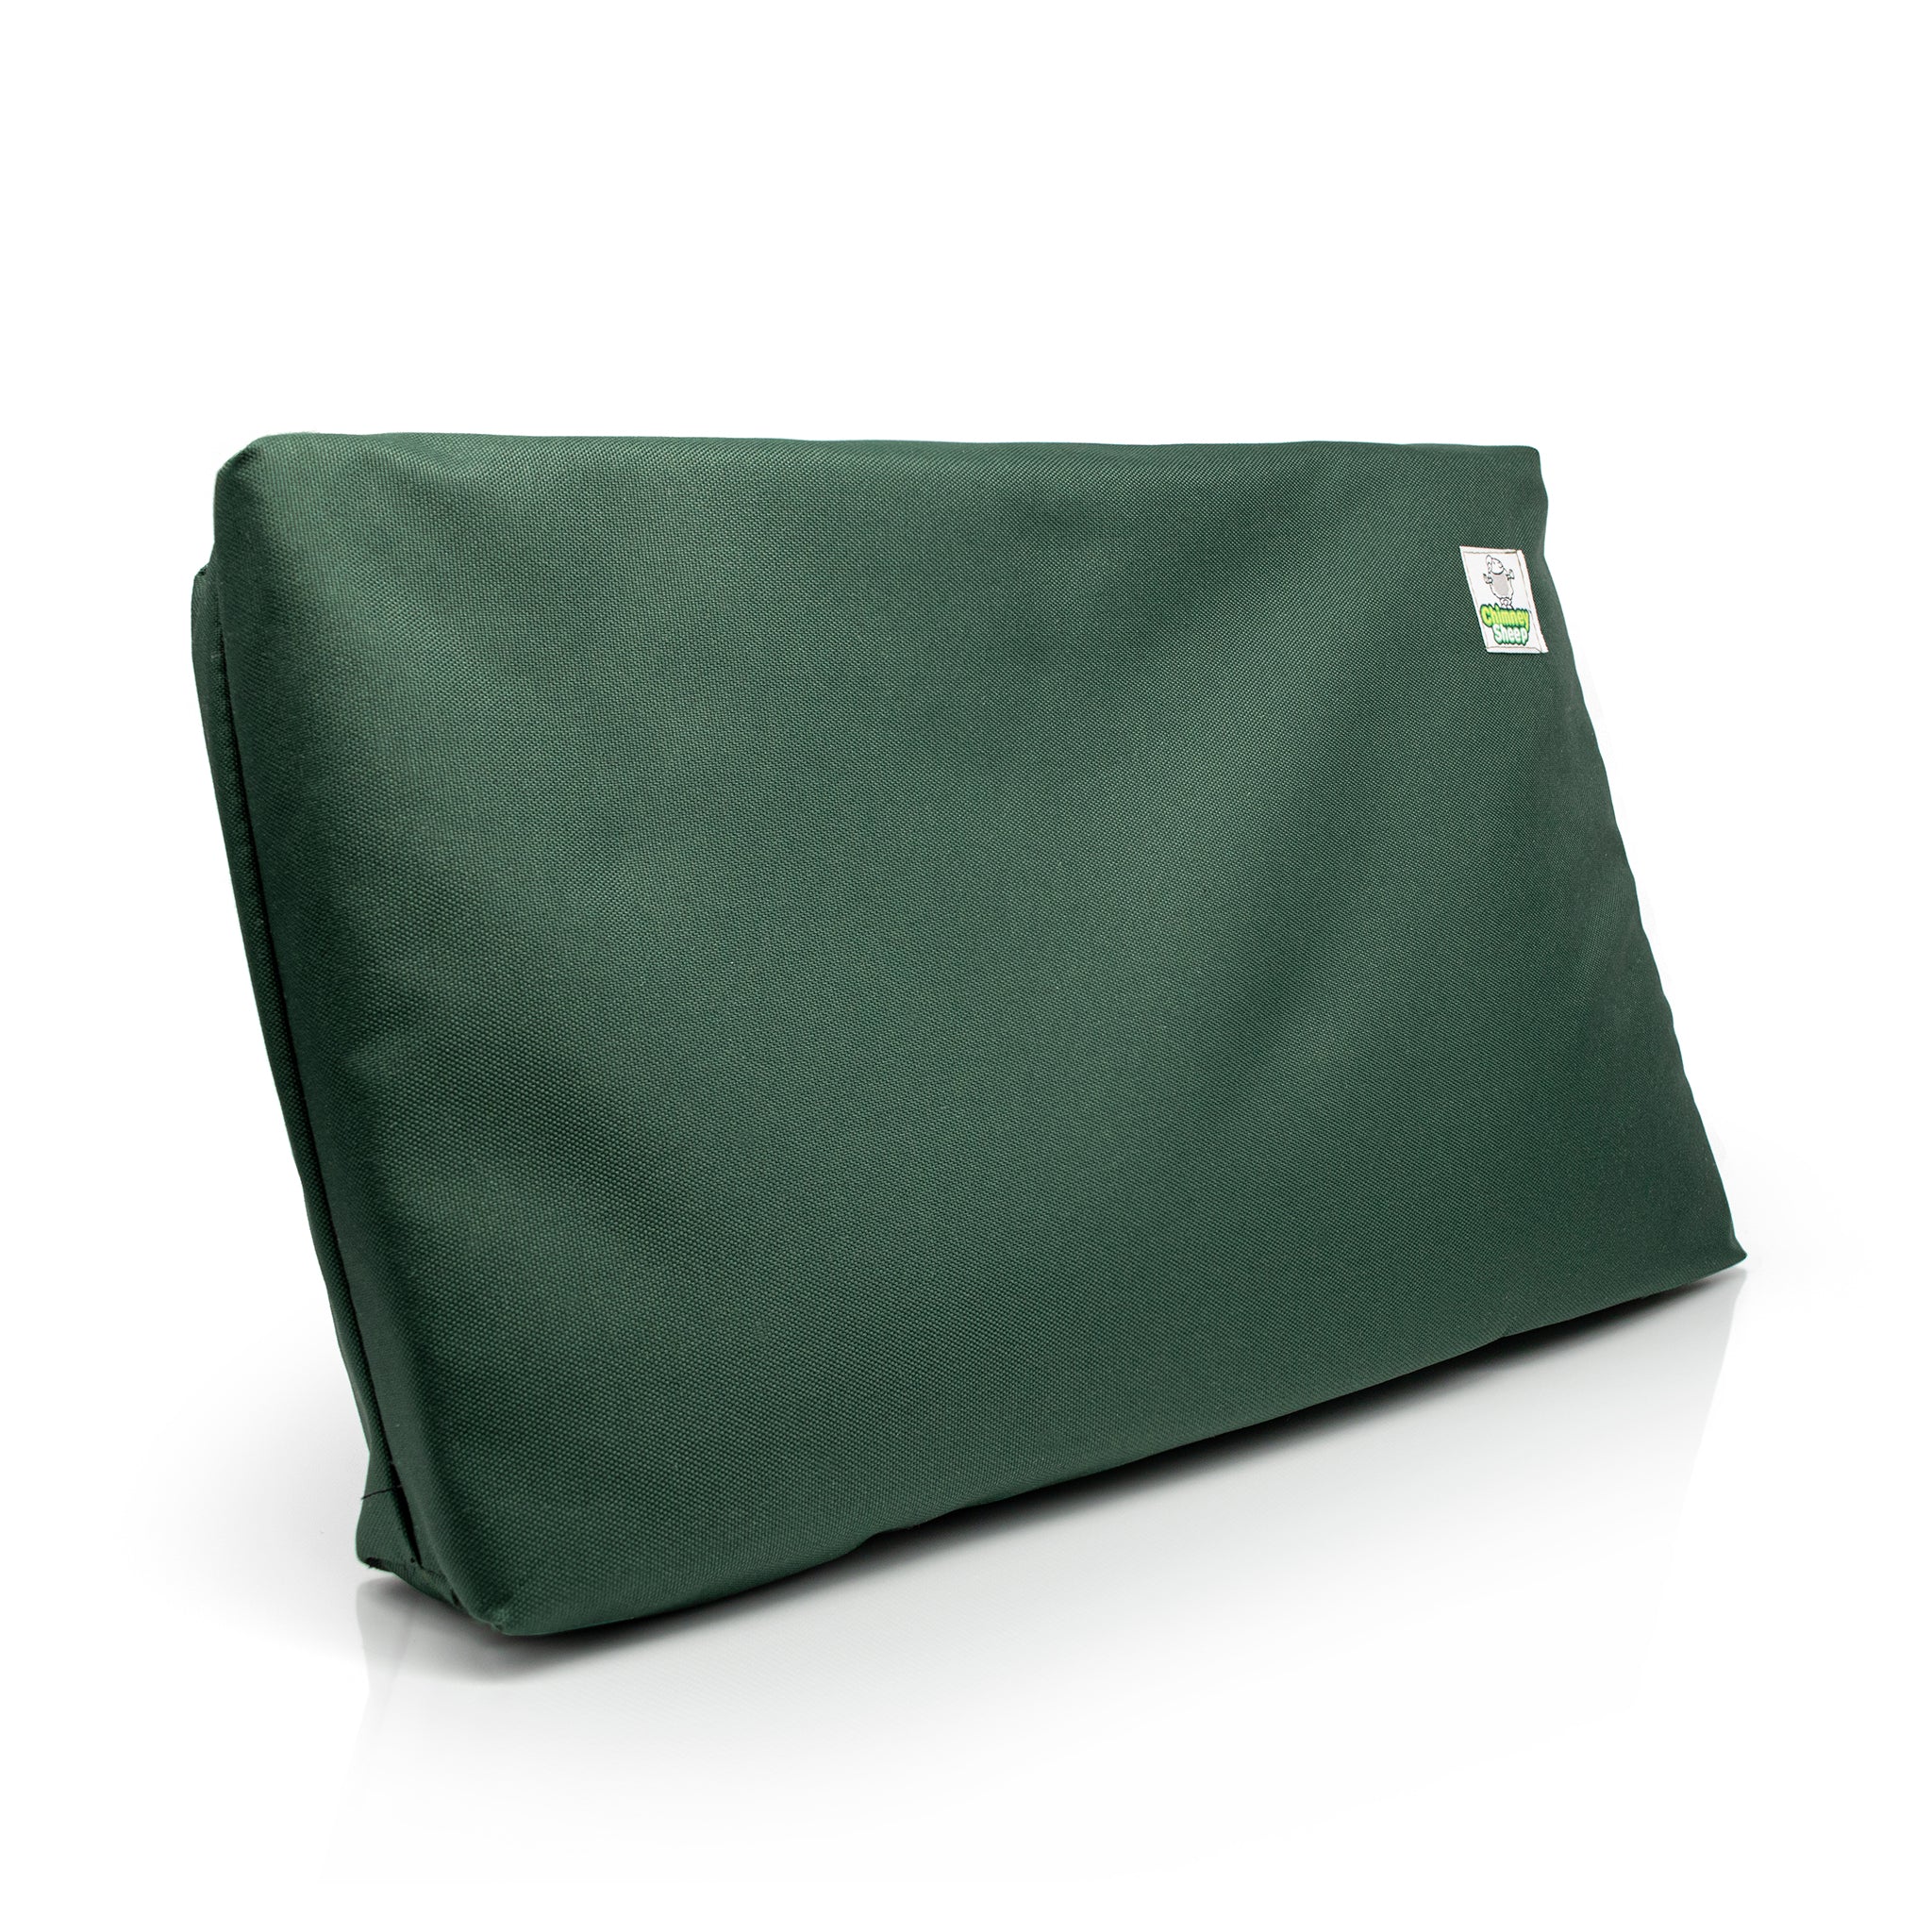 Angled view of garden kneeler made from water repellent PVC coated polyester